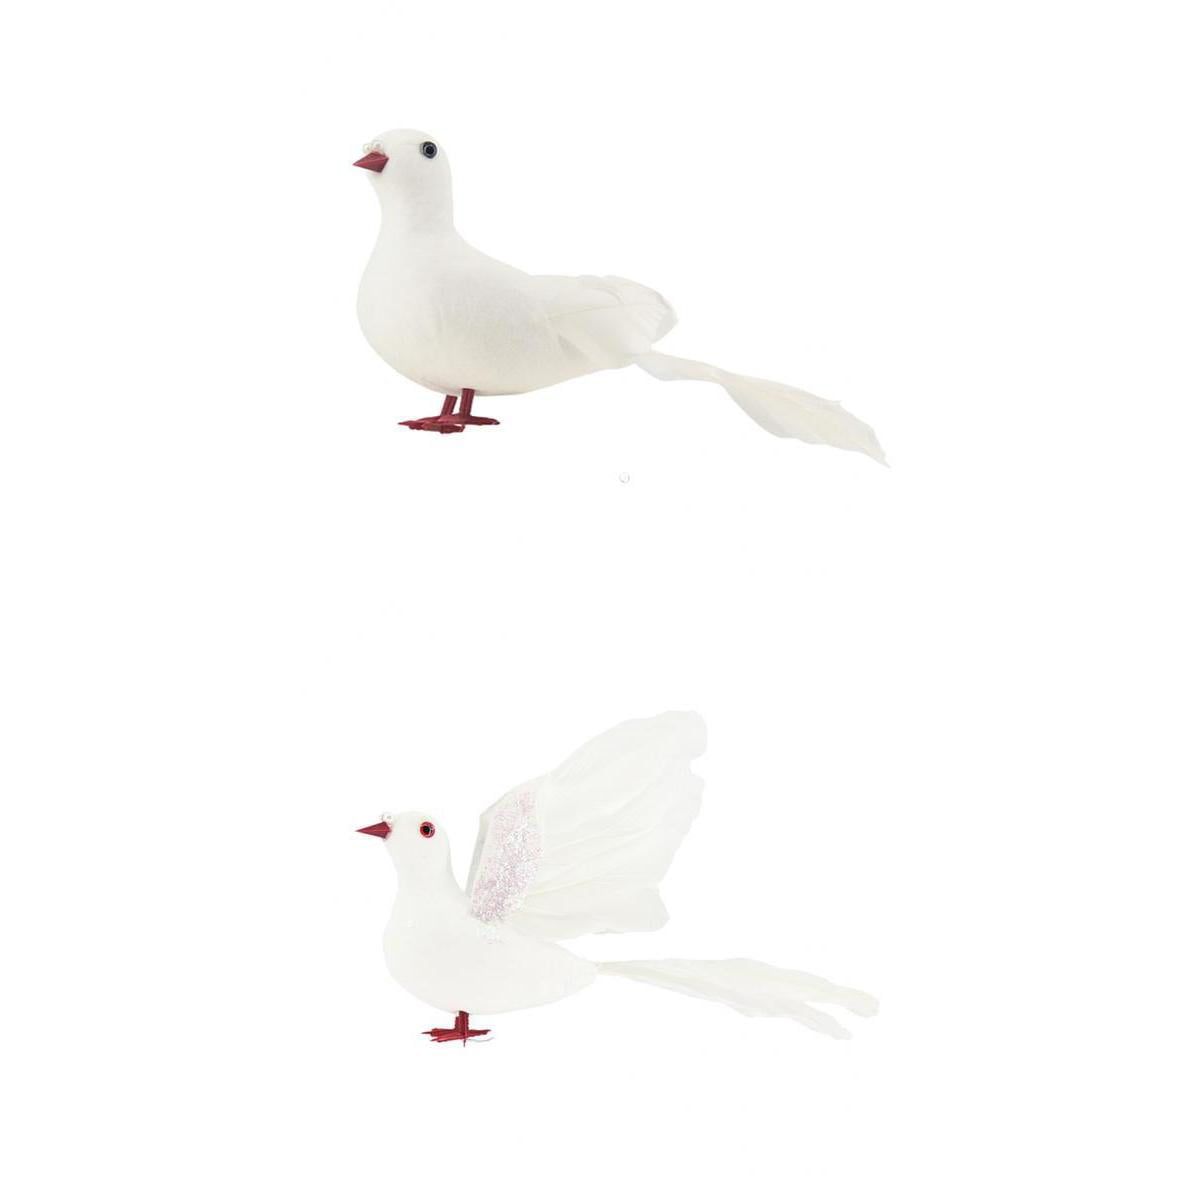 New Lifelike White Fur Standing Pigeon Animal Model Toy Props Home Ornament 